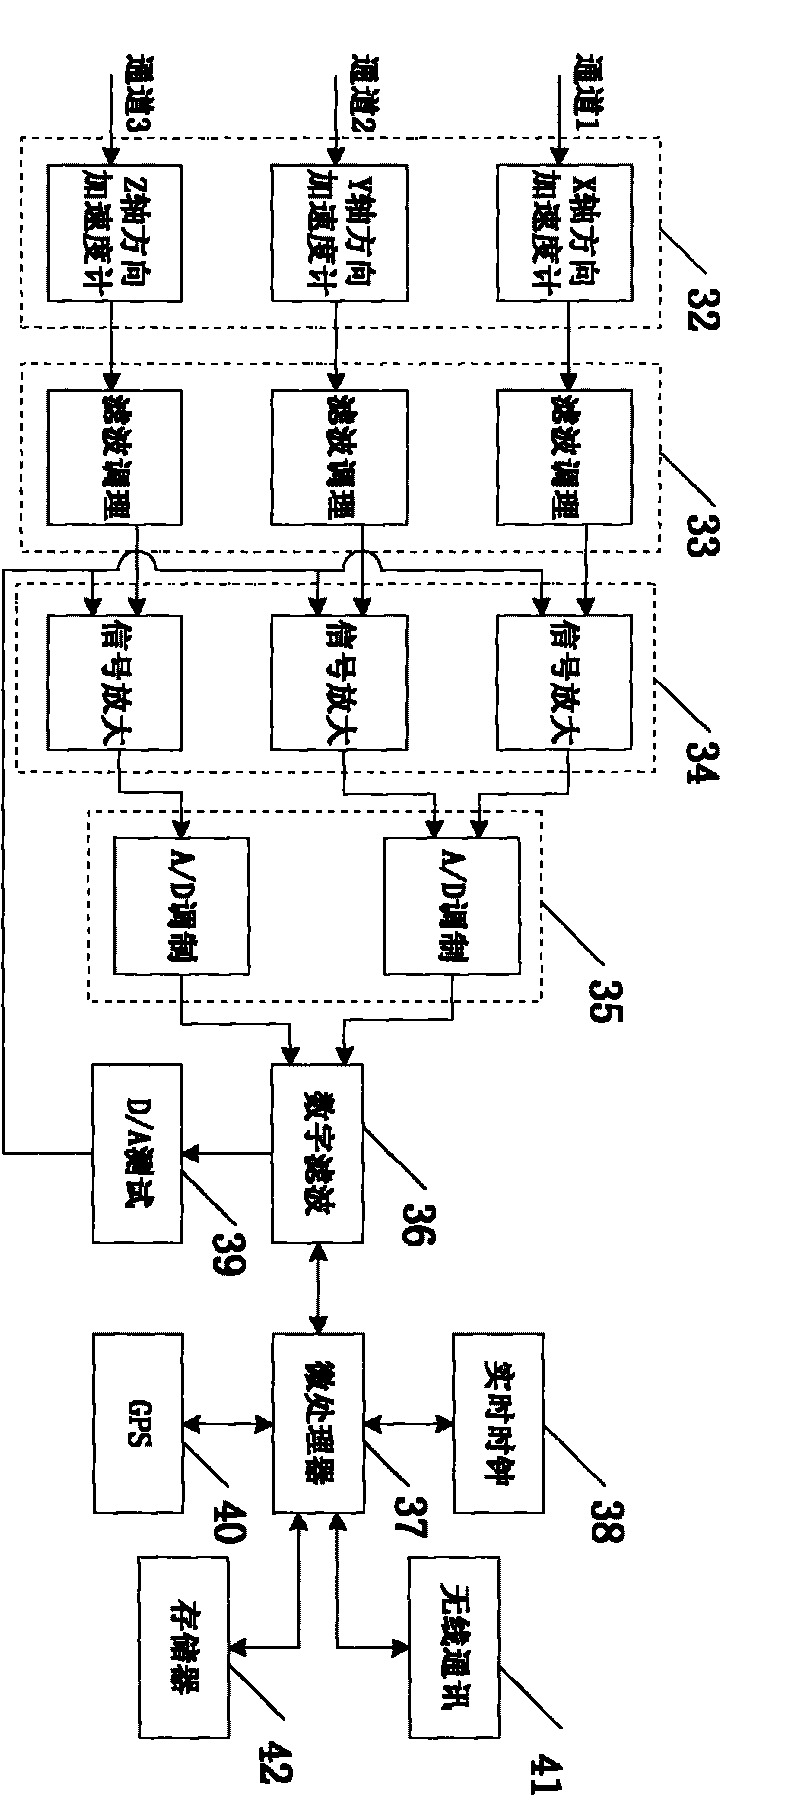 Drilling earthquake reference signal collection method and device